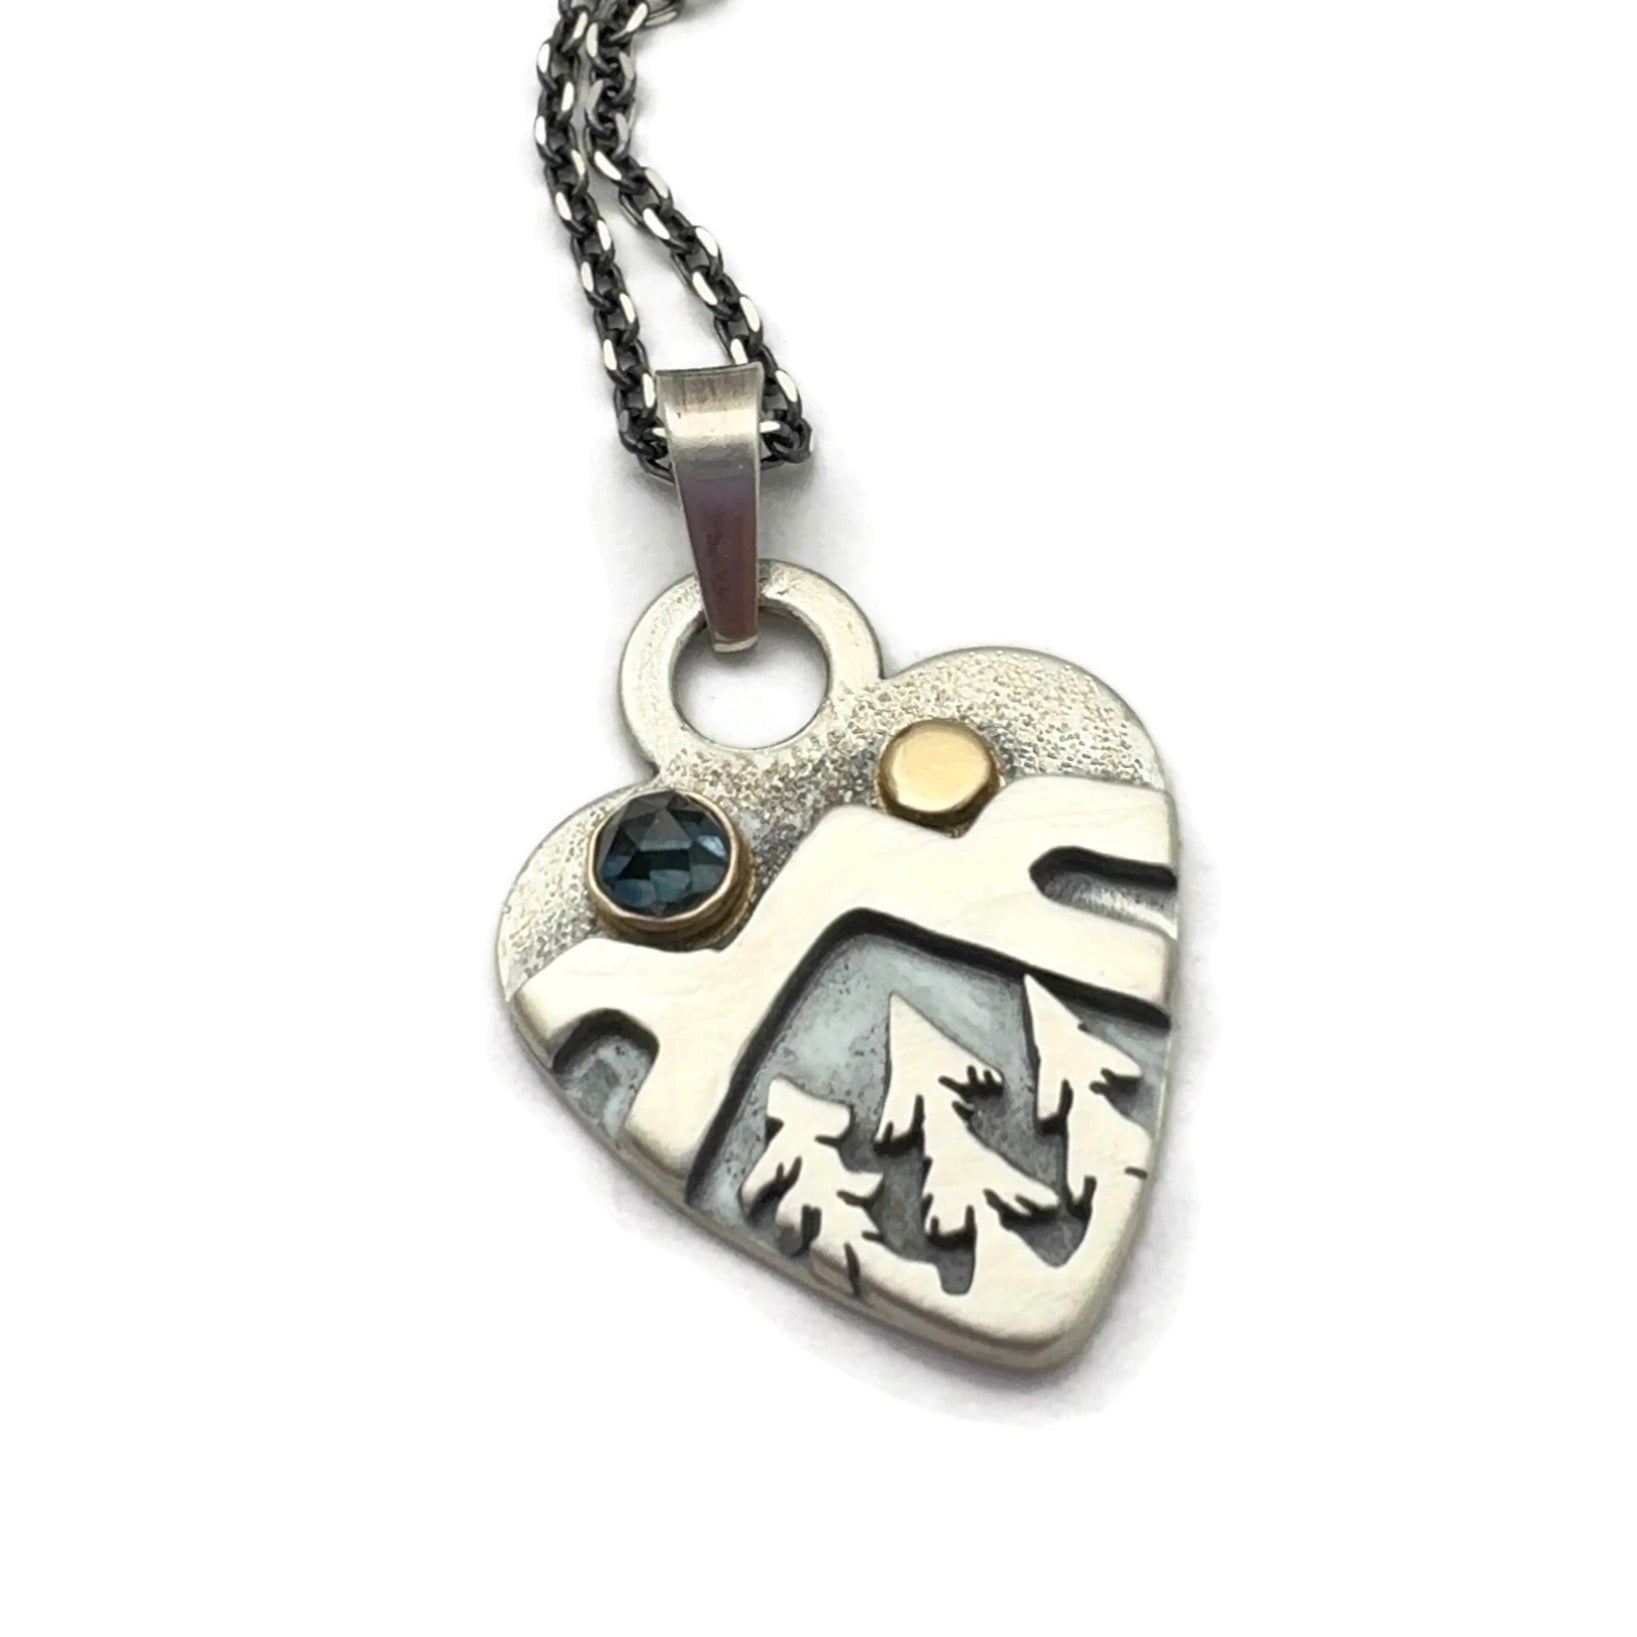 Alpine Heart in Sterling Silver, 14k Gold with Montana Sapphire